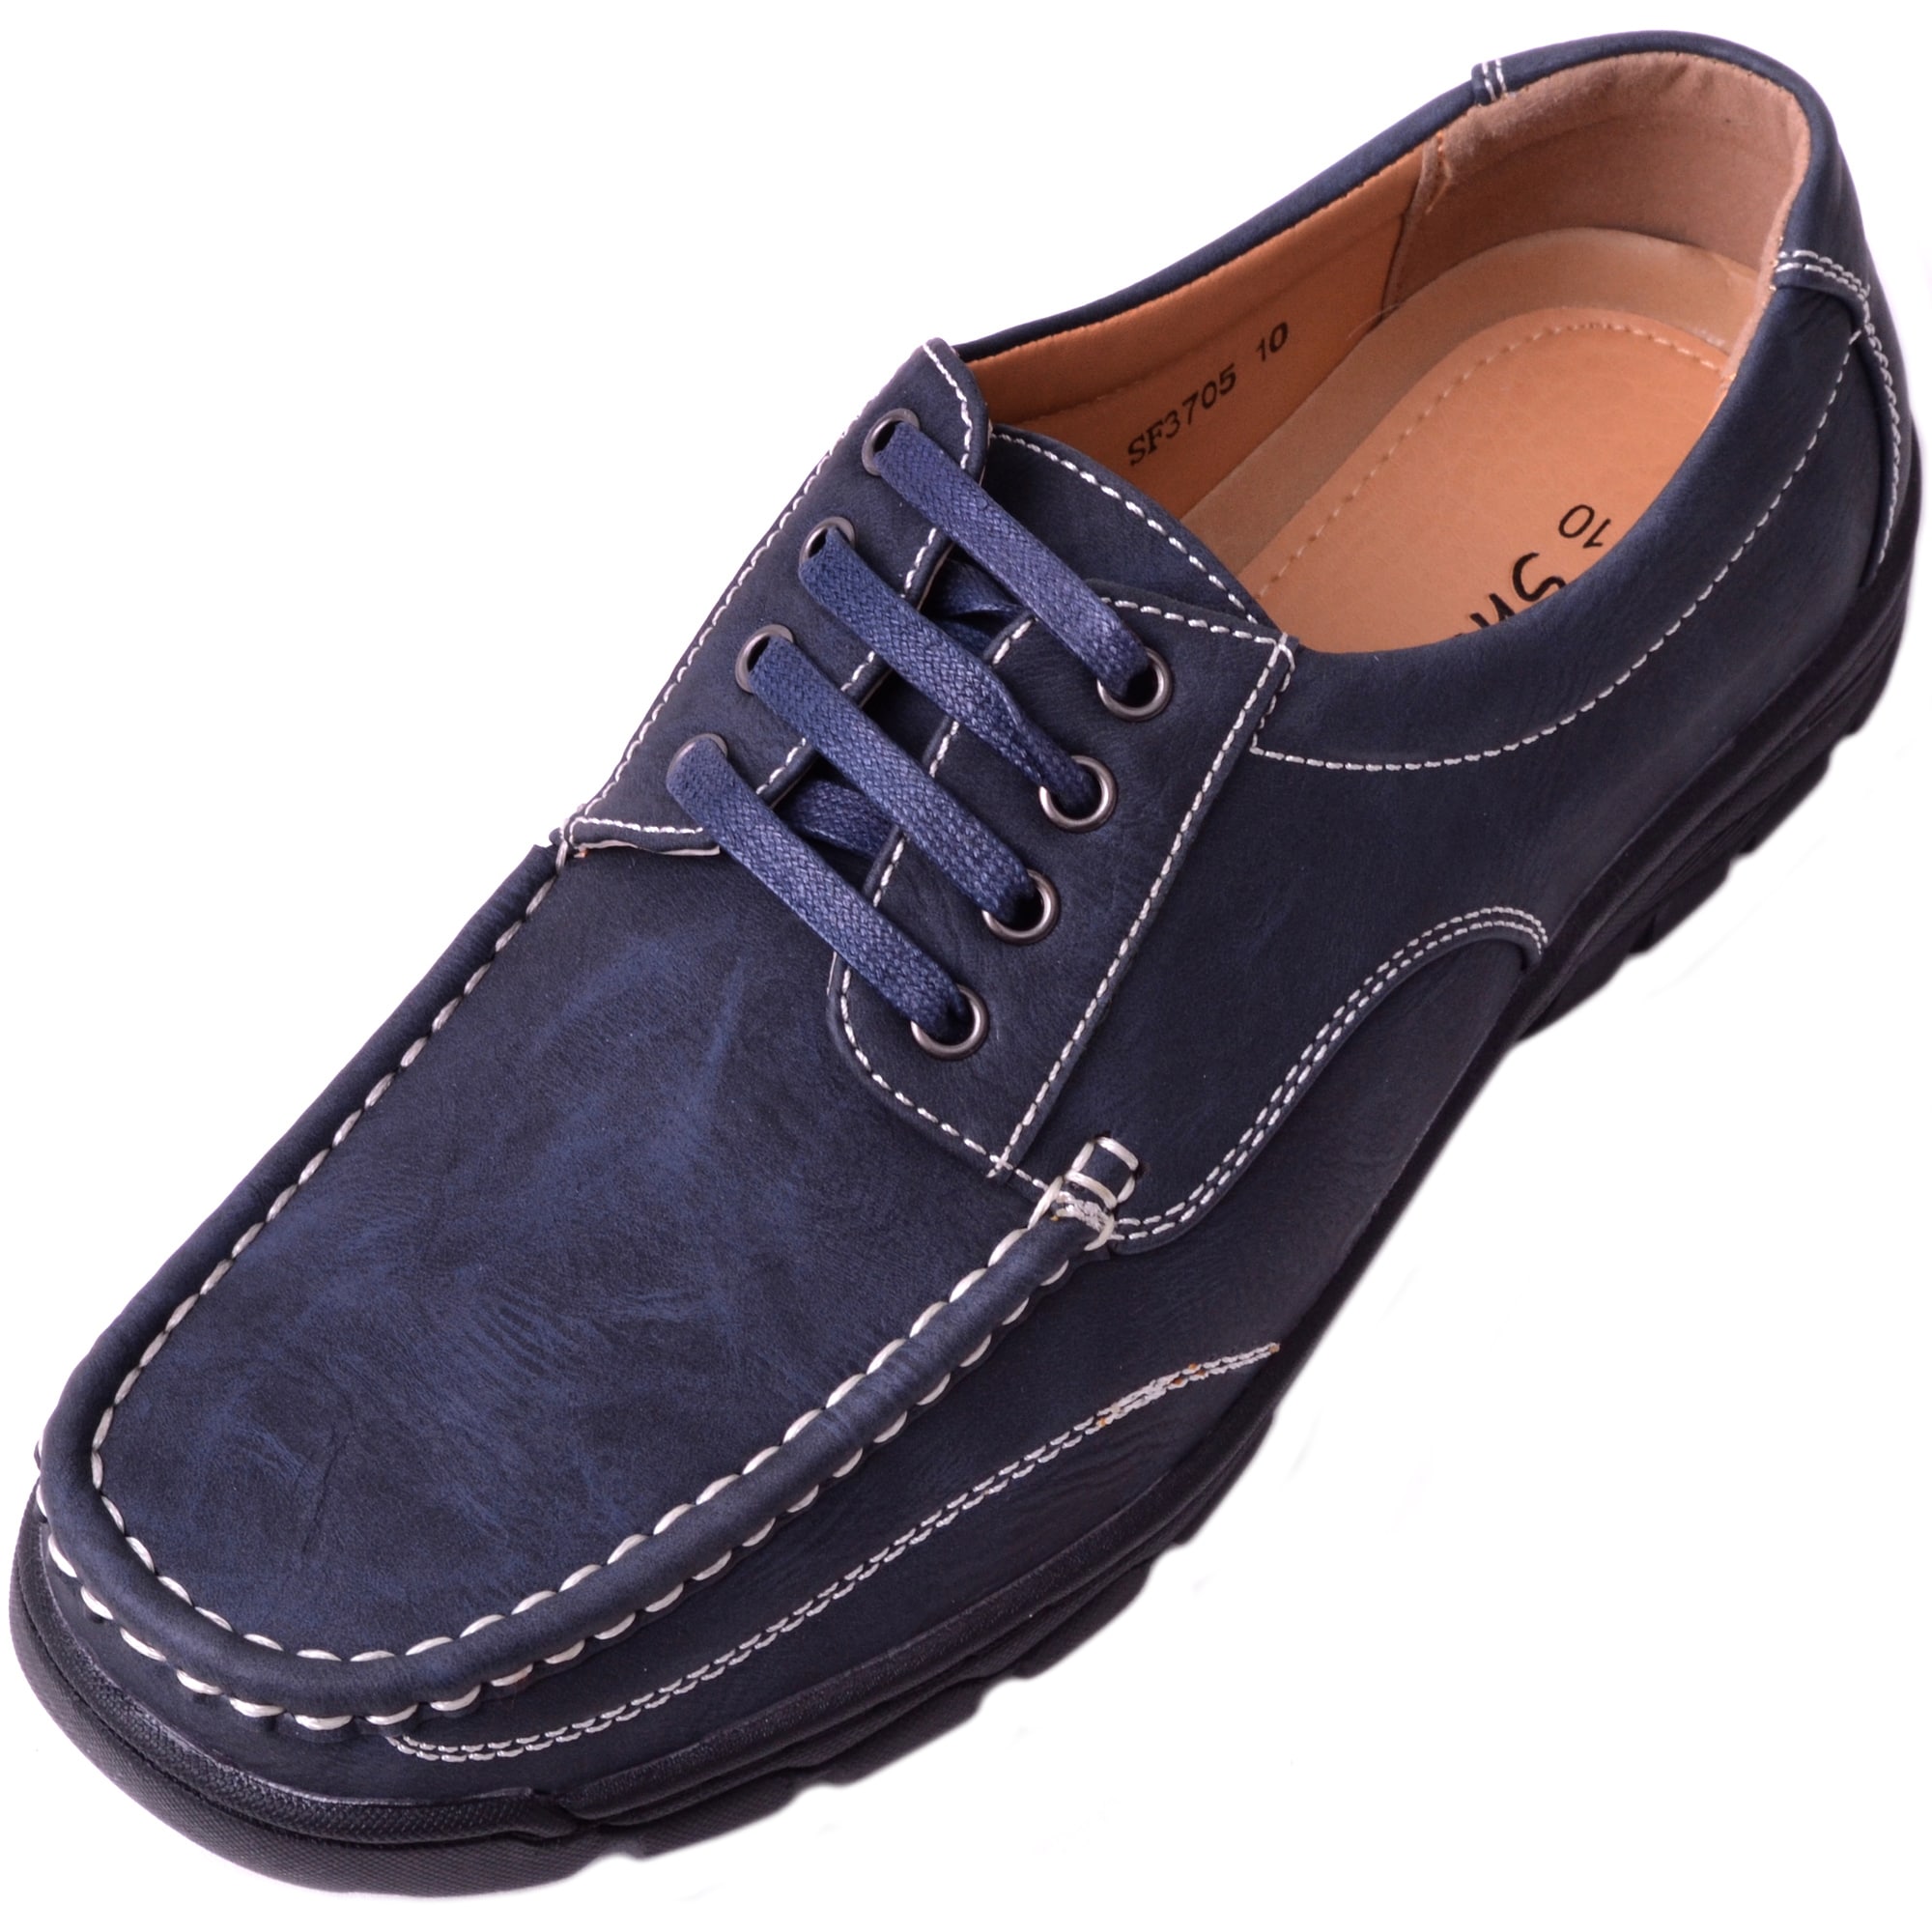 Promotion price ZDRD Fashion Handmade Men shoes Lace-Up 